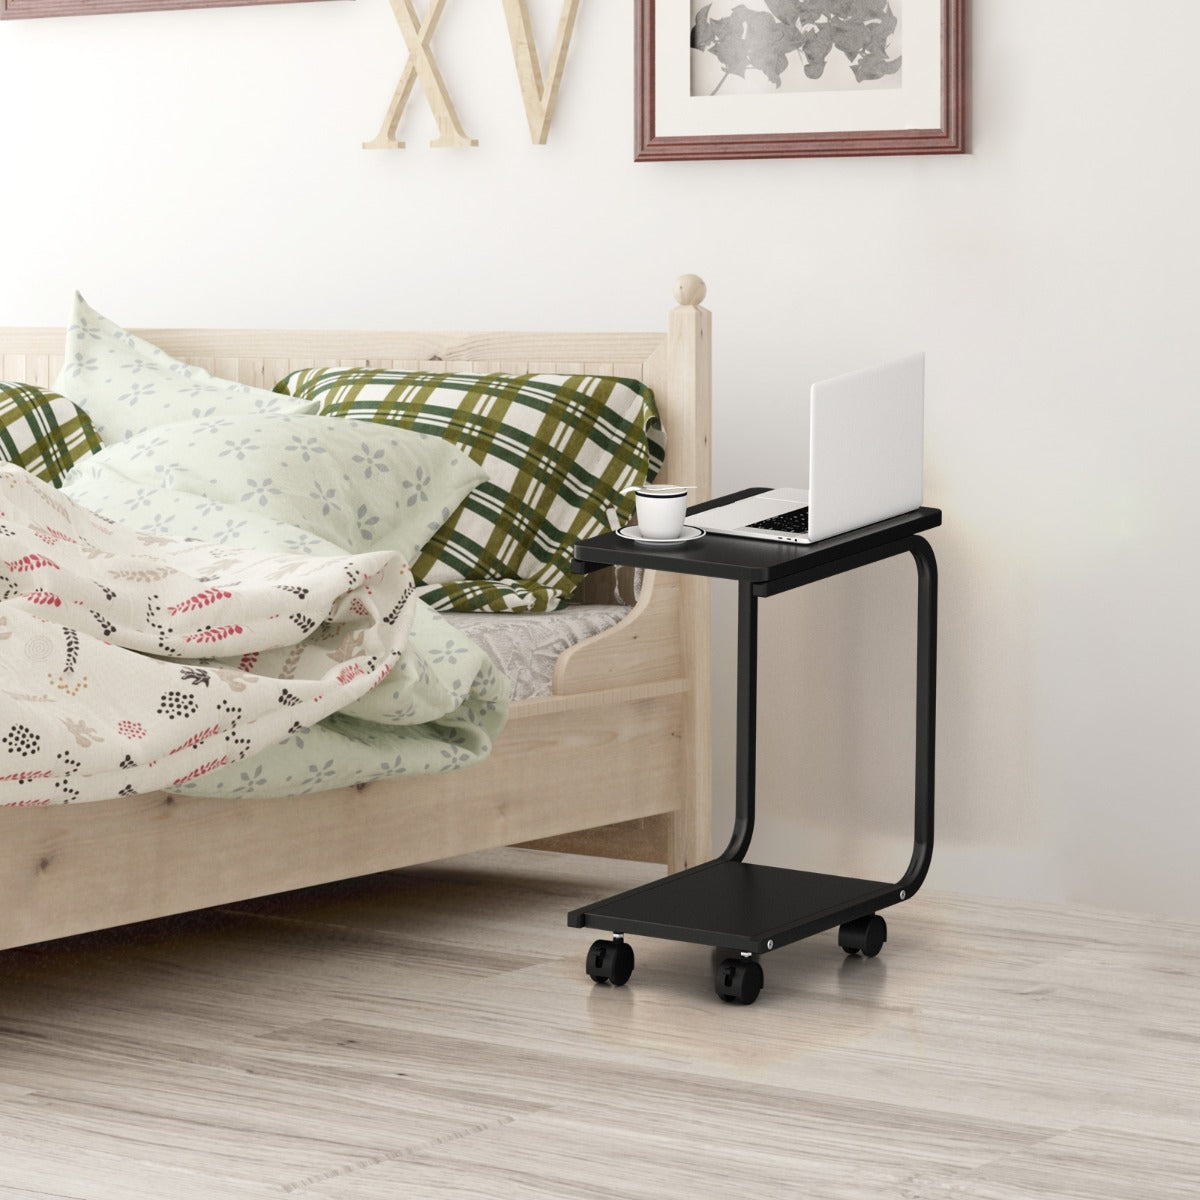 Bedside Table with 4 Wheels, C-Shaped Laptop Side Table, End Table, Costway, 2